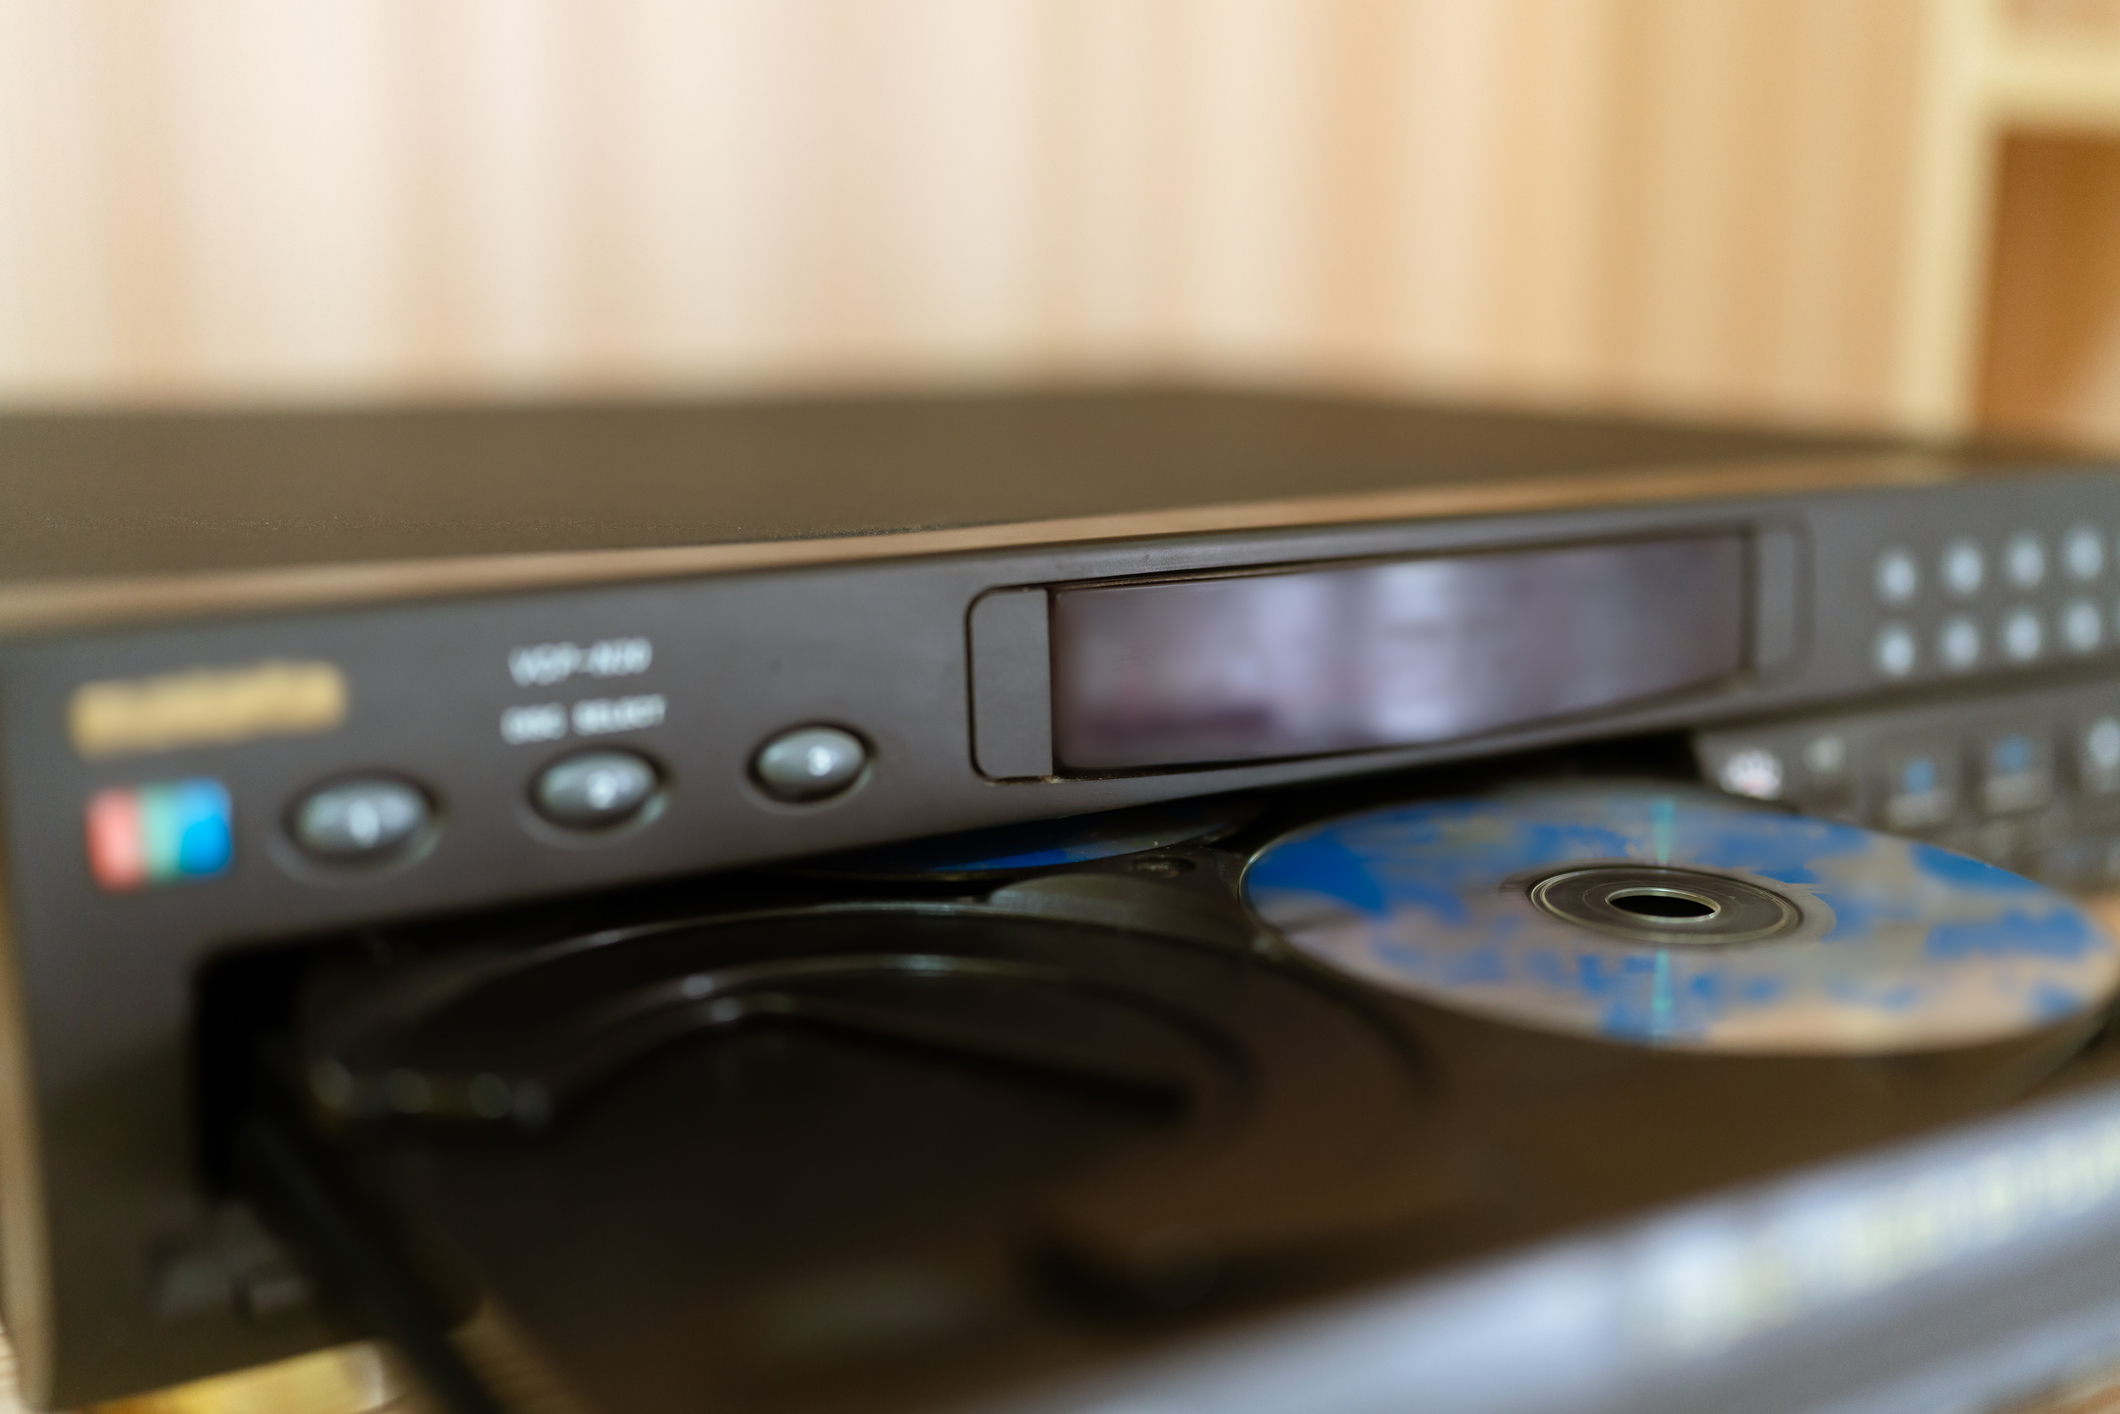 A DVD player with an open tray and disc partially inserted